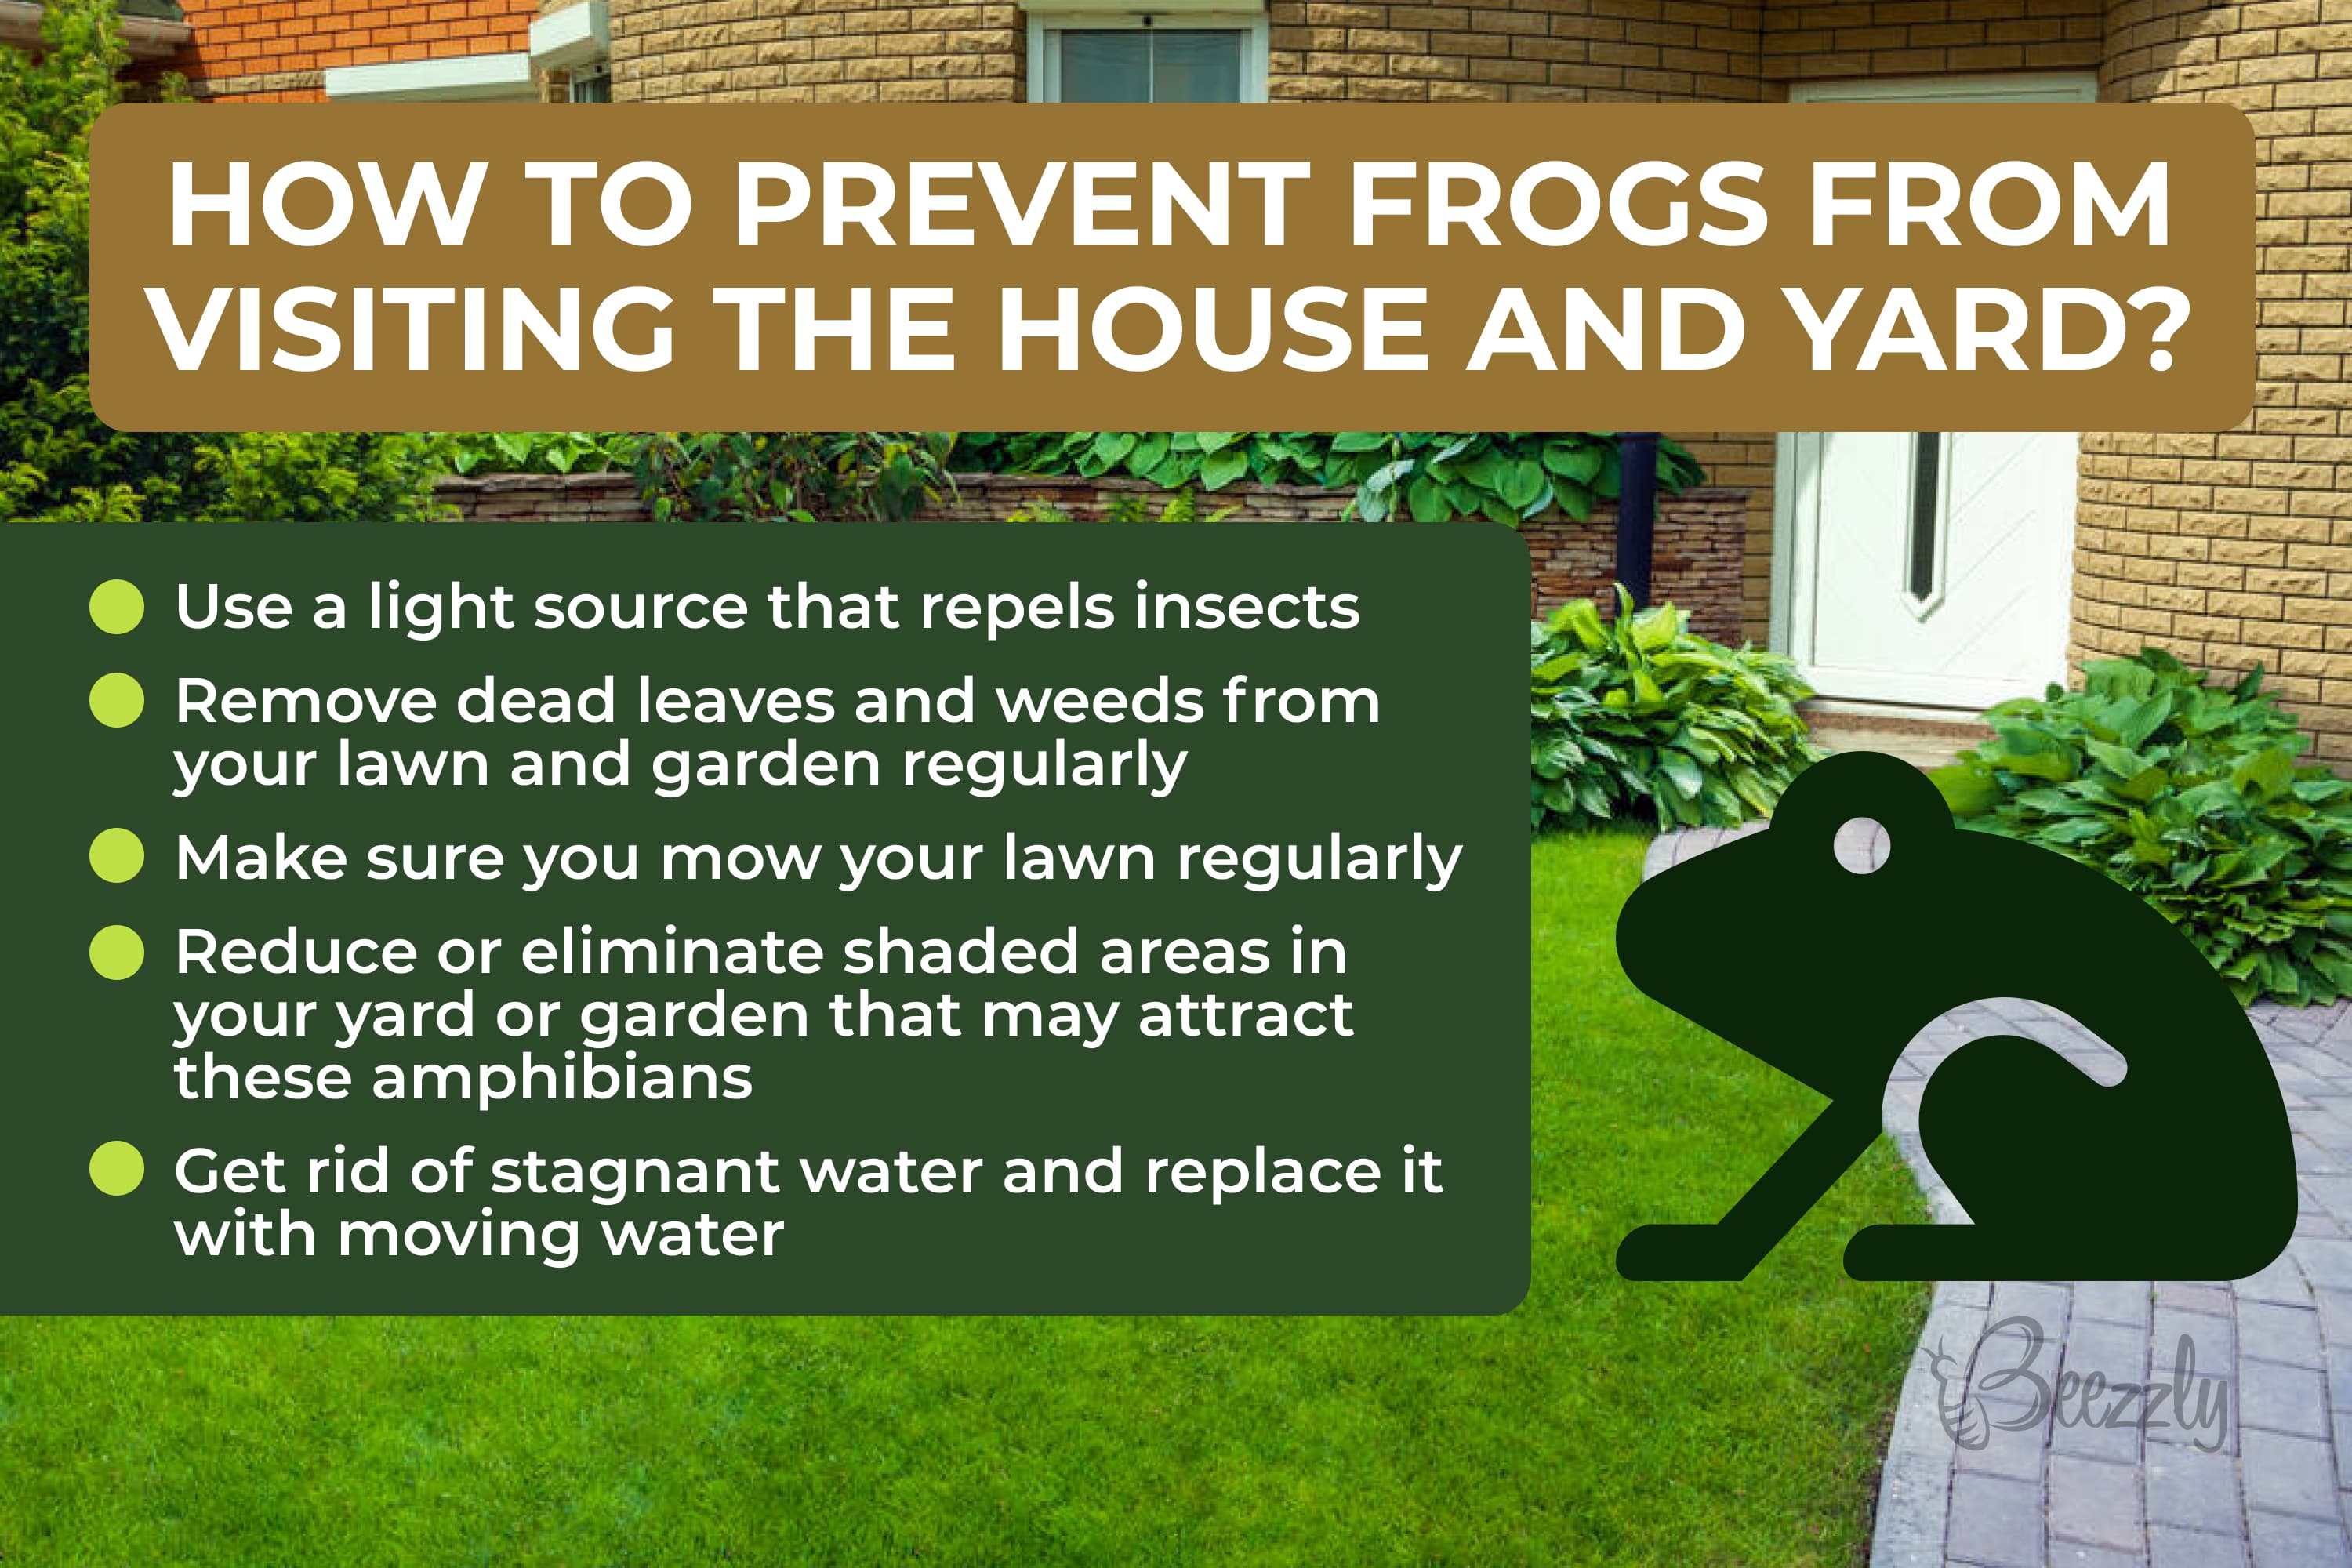 How to prevent frogs from visiting the house and yard